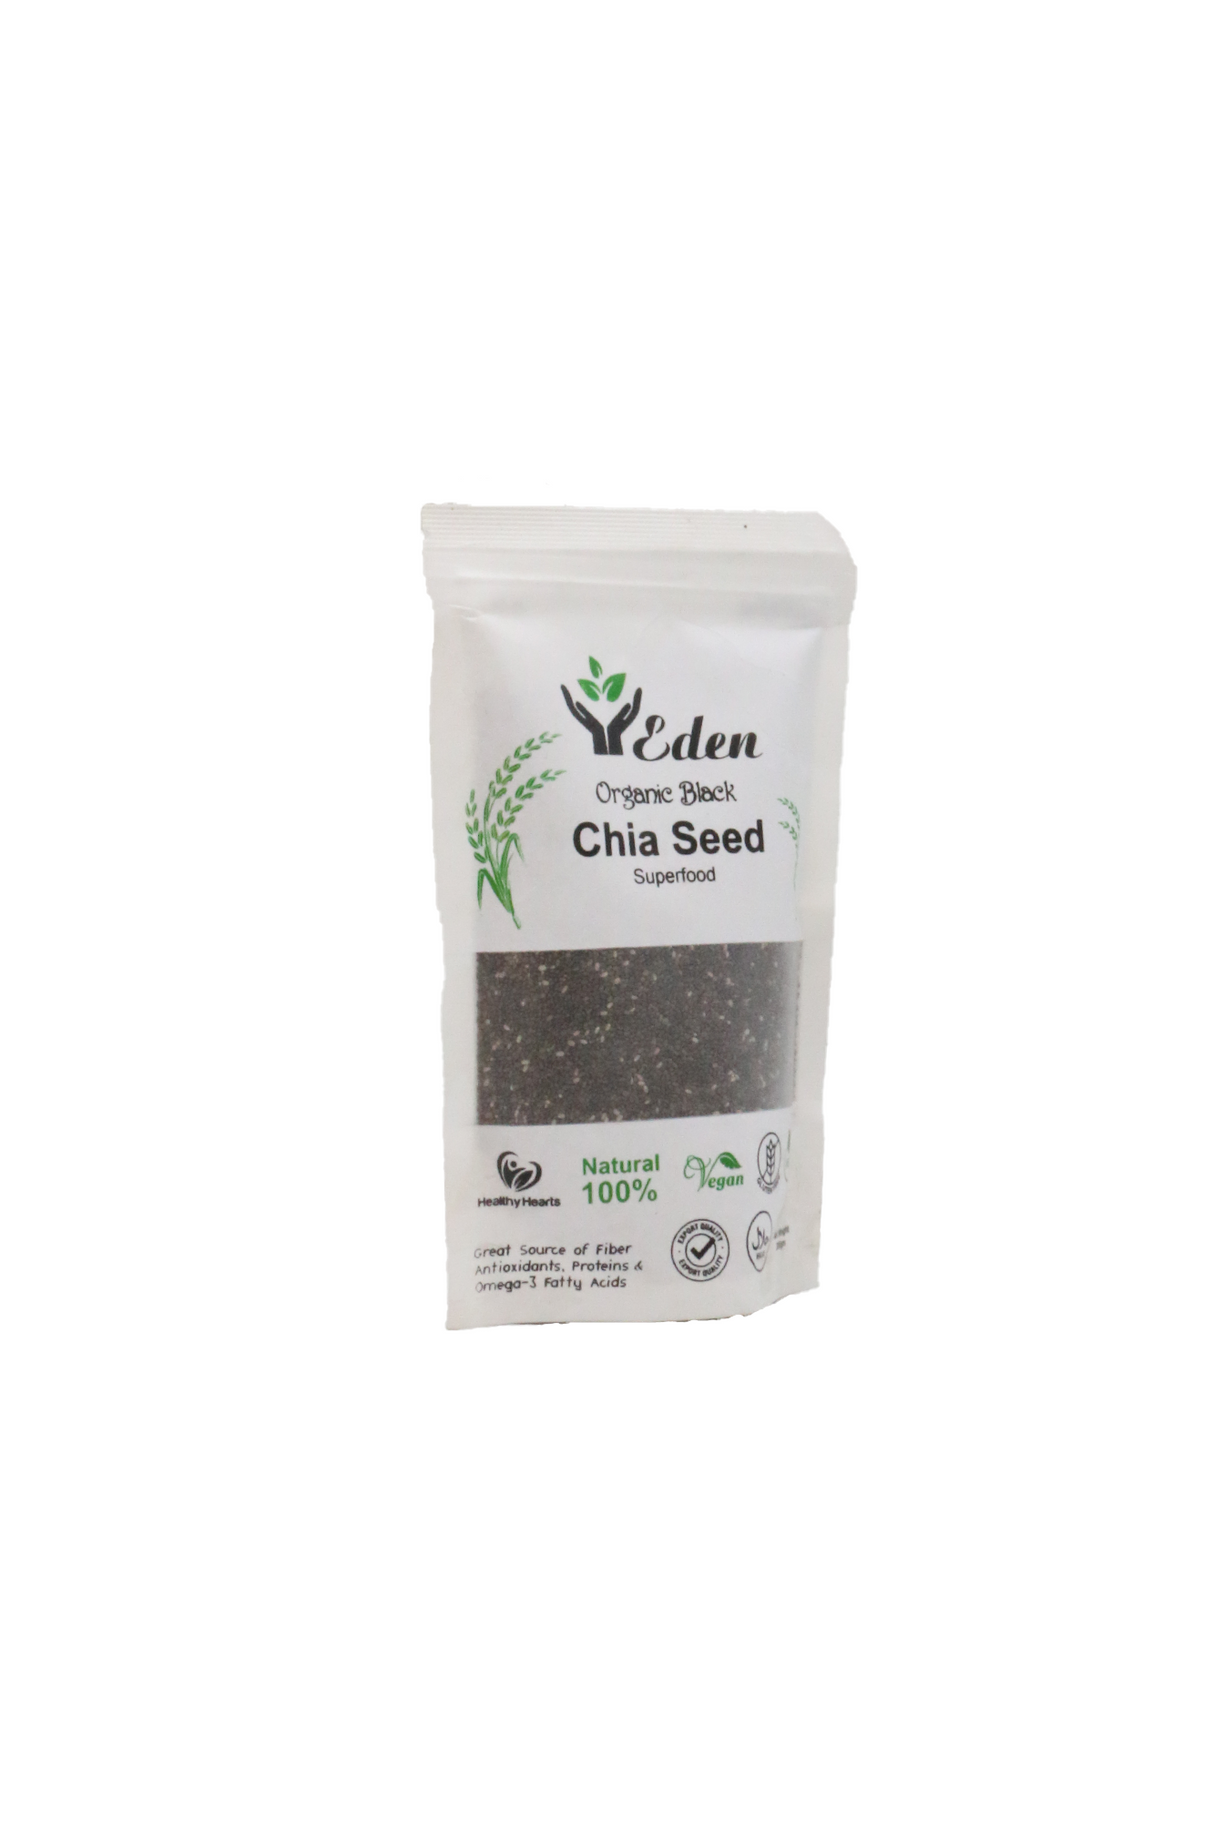 eden chia seed 200gm